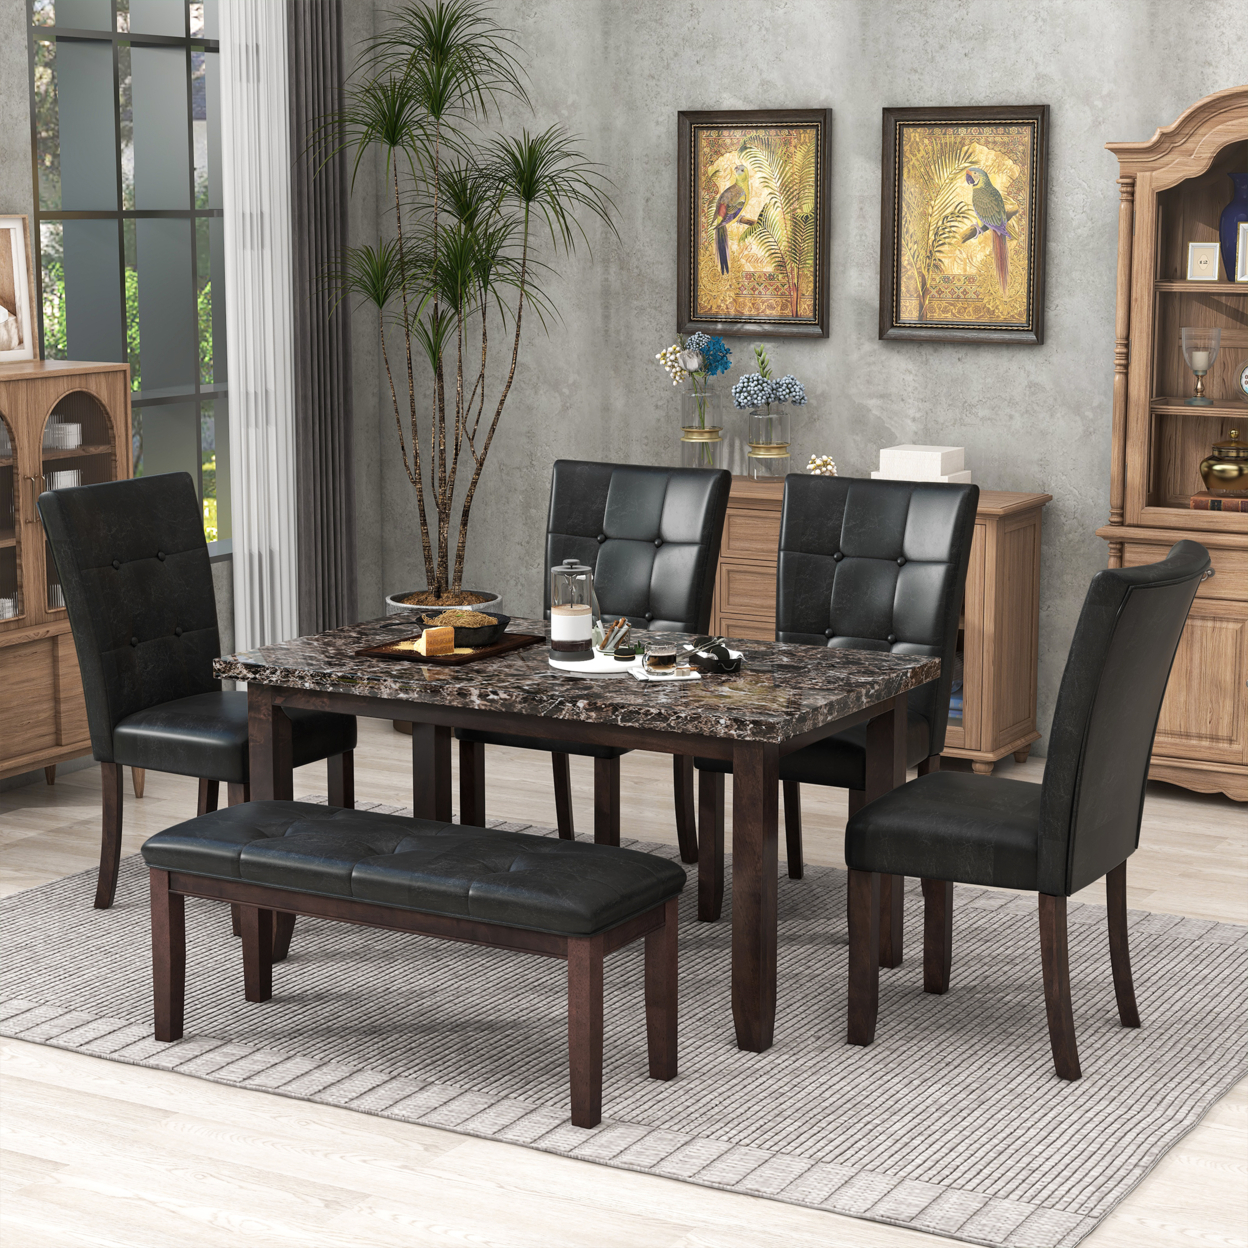 6-piece Faux Marble Dining Table Set with one Faux Marble Dining Table ,4 Chairs and 1 Bench, Black